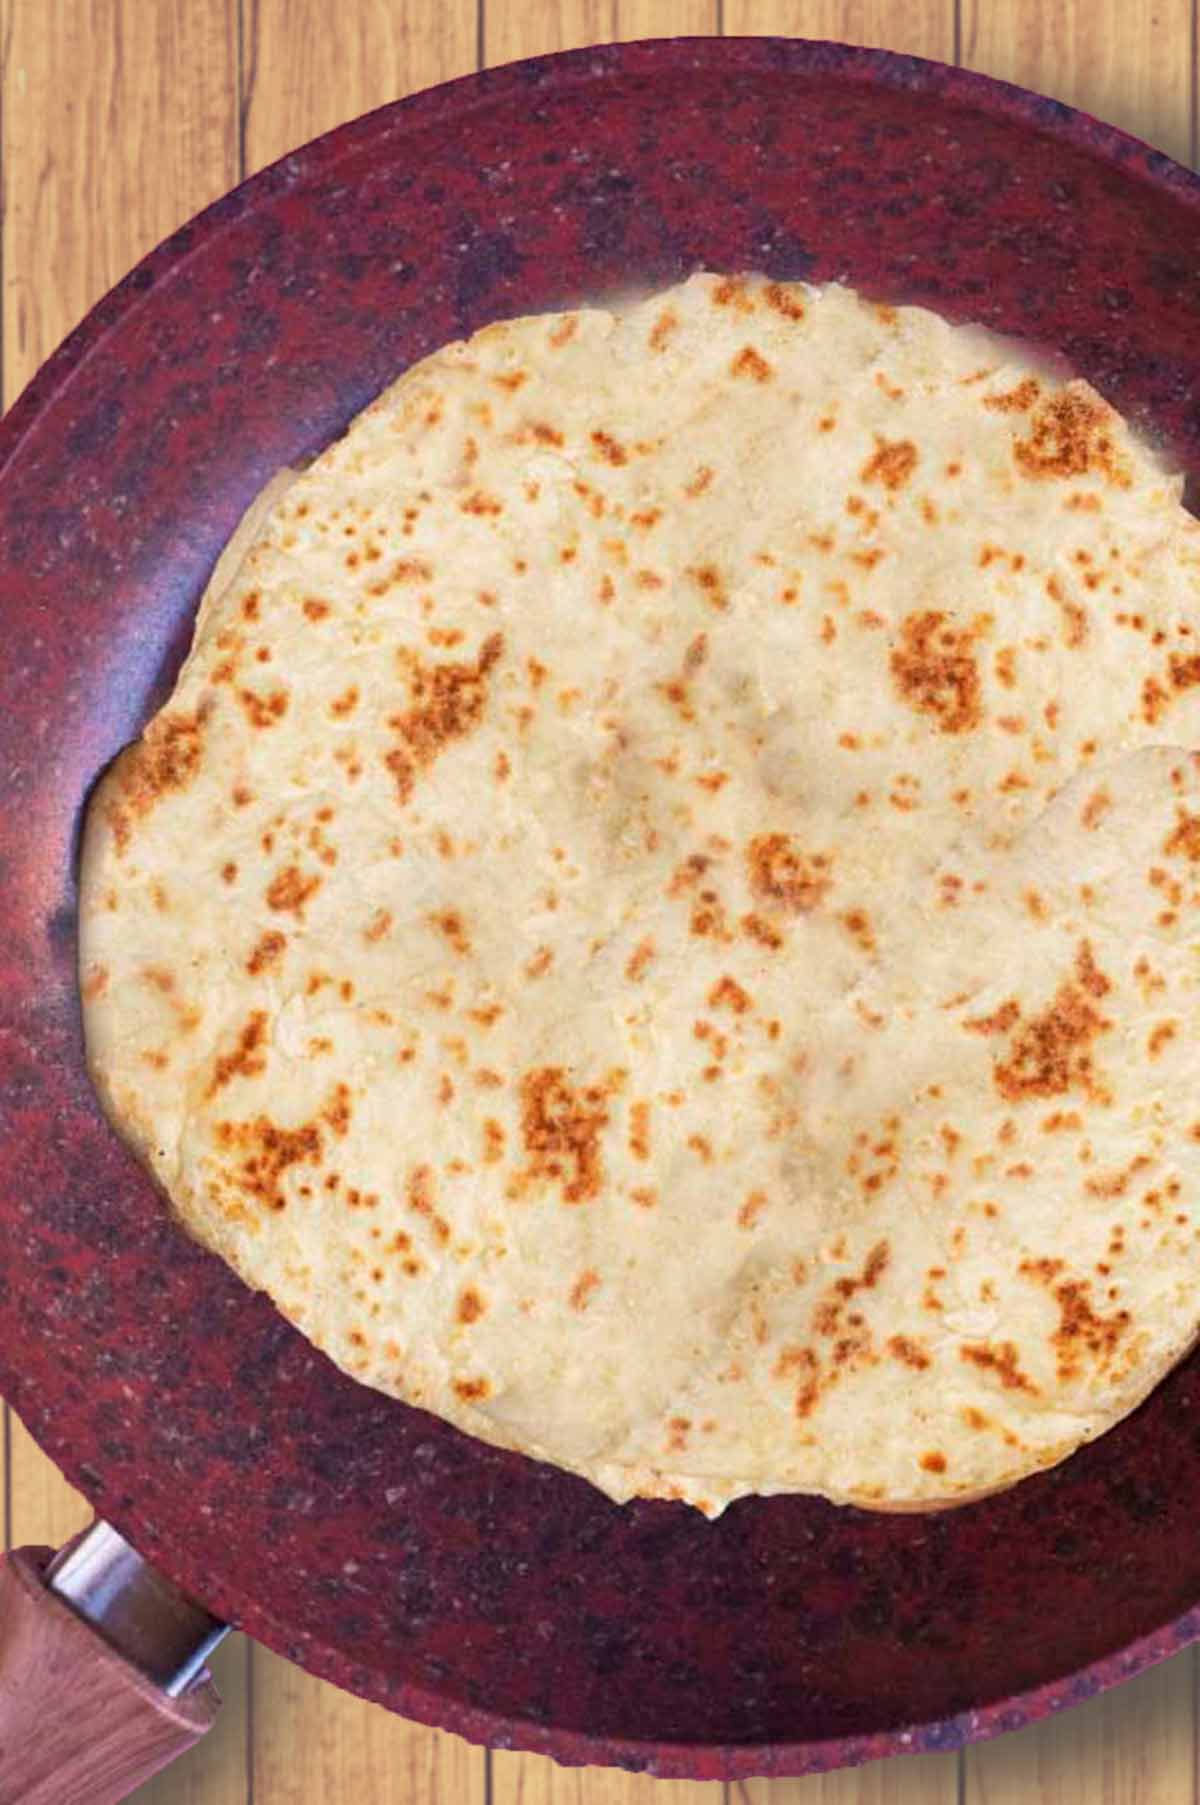 A frying pan with a cooked flatbread.